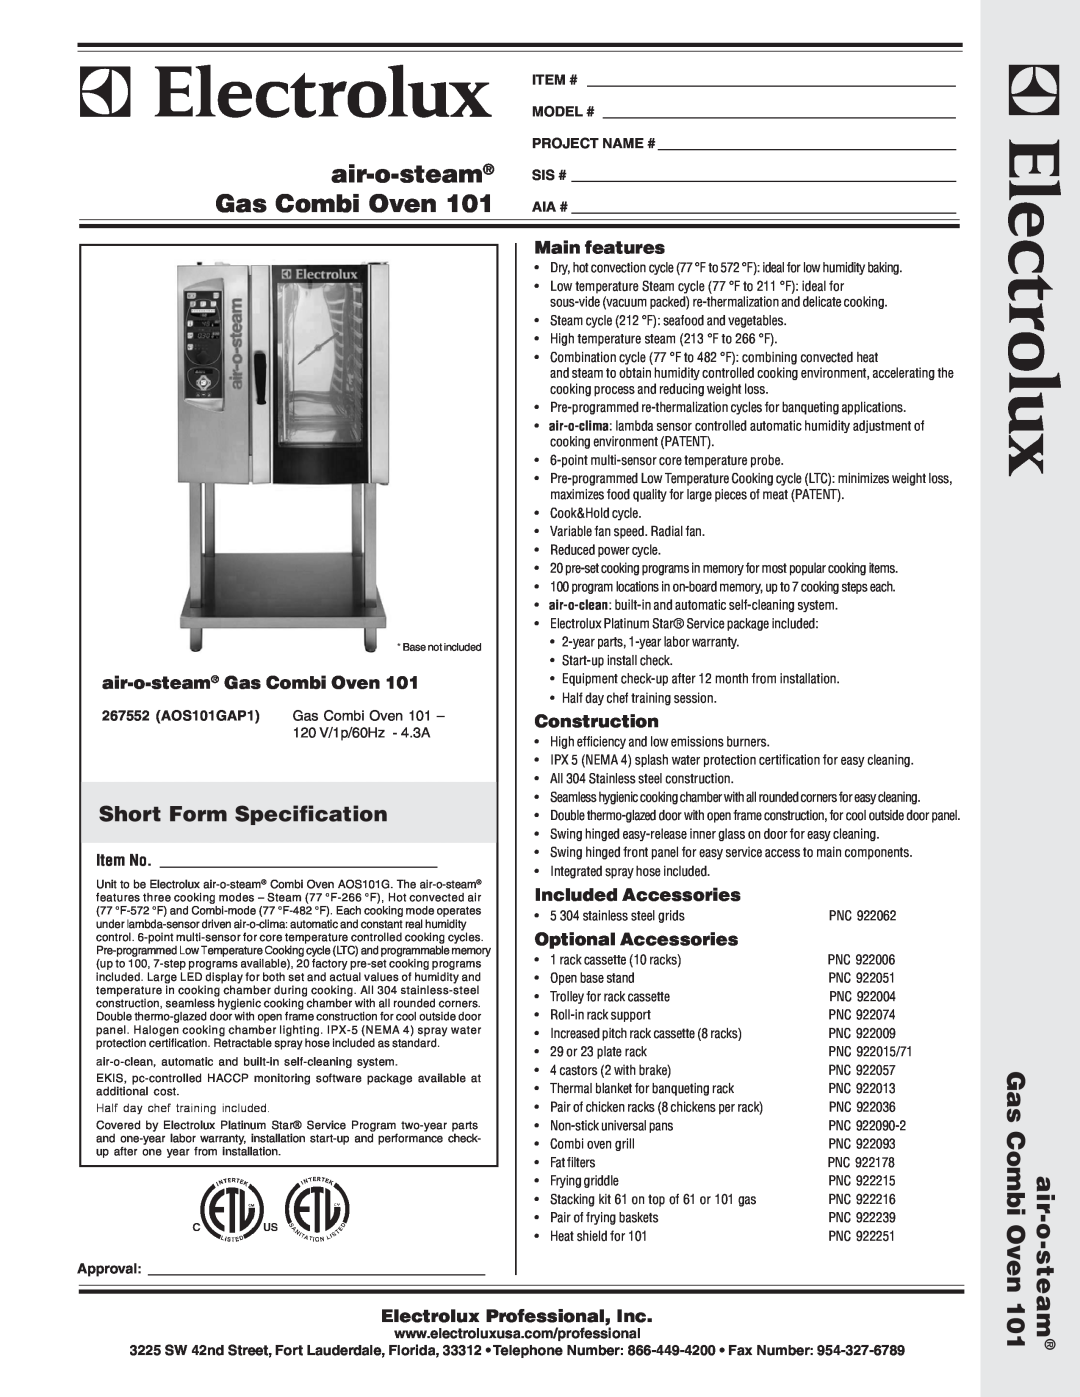 Electrolux AOS101GAP1 warranty Short Form Specification, air-o-steam Gas Combi Oven, Main features, Construction, Item # 